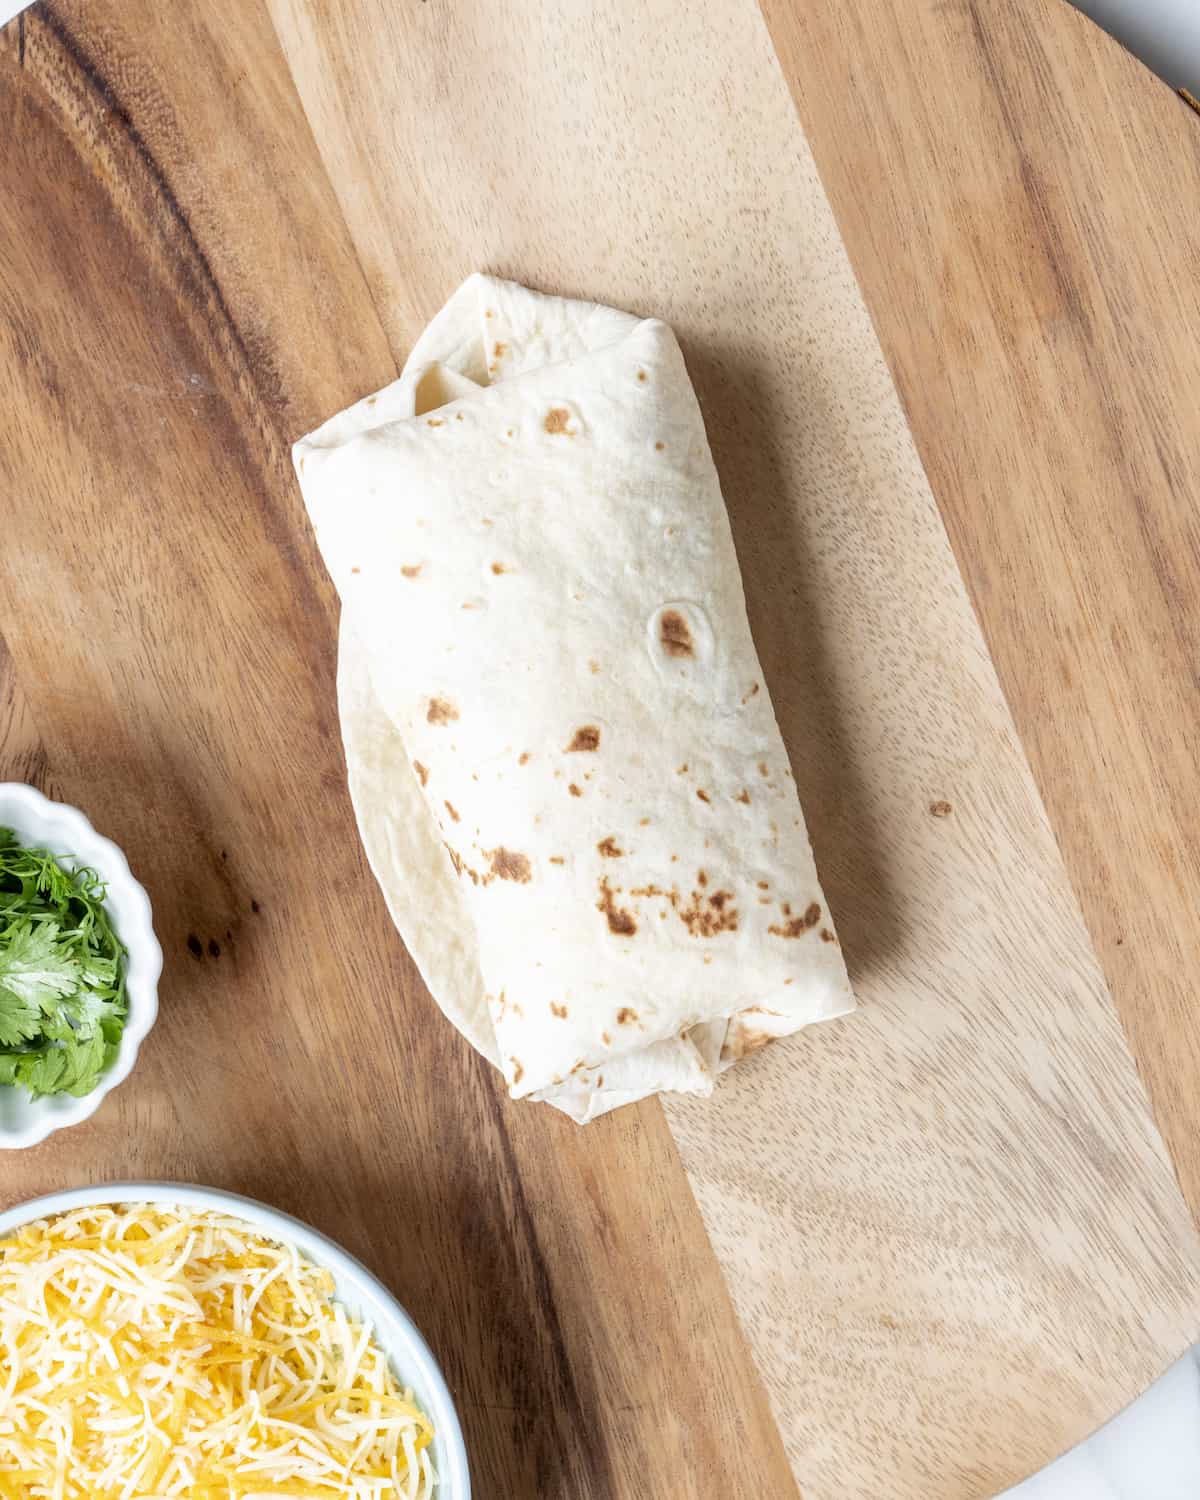 A rolled up breakfast burrito sitting on a wooden cutting board next to a bowl of shredded cheese and cilantro.  